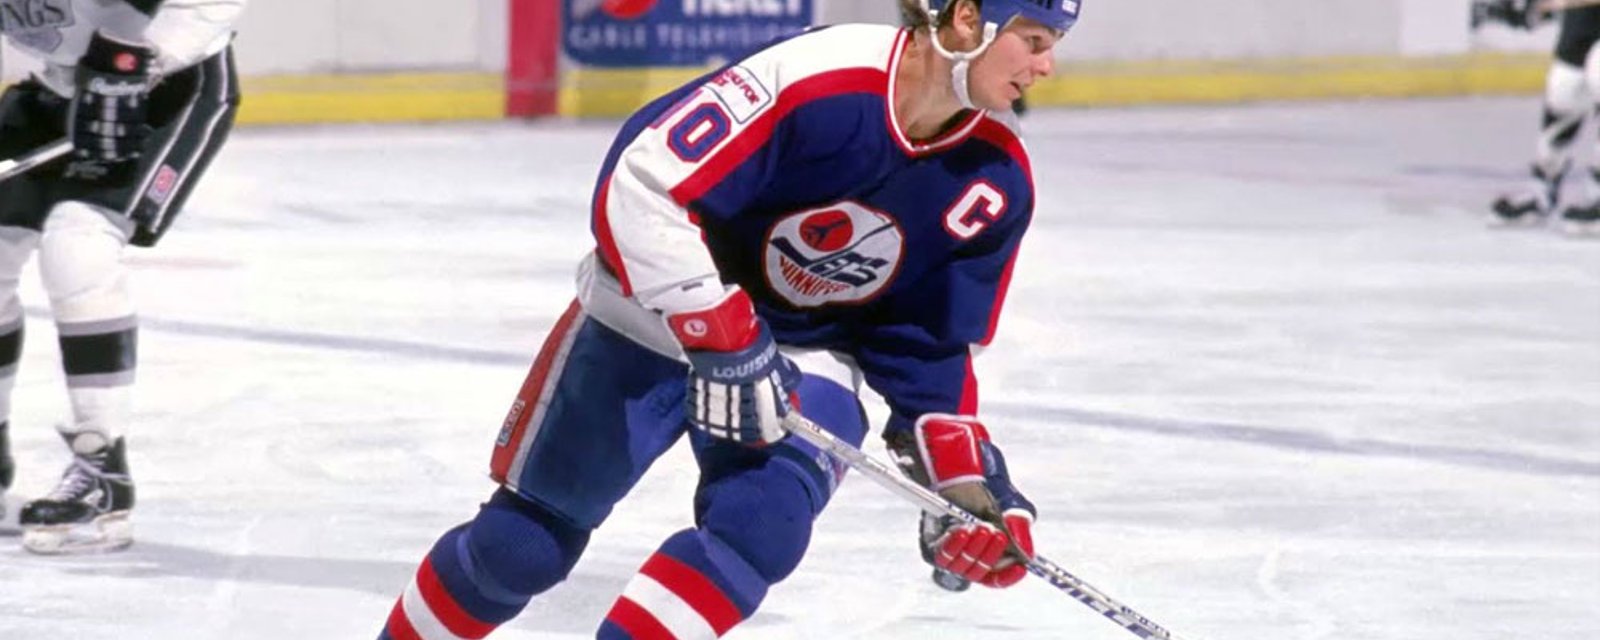 Dale Hawerchuk undergoing chemotherapy treatment for stomach cancer